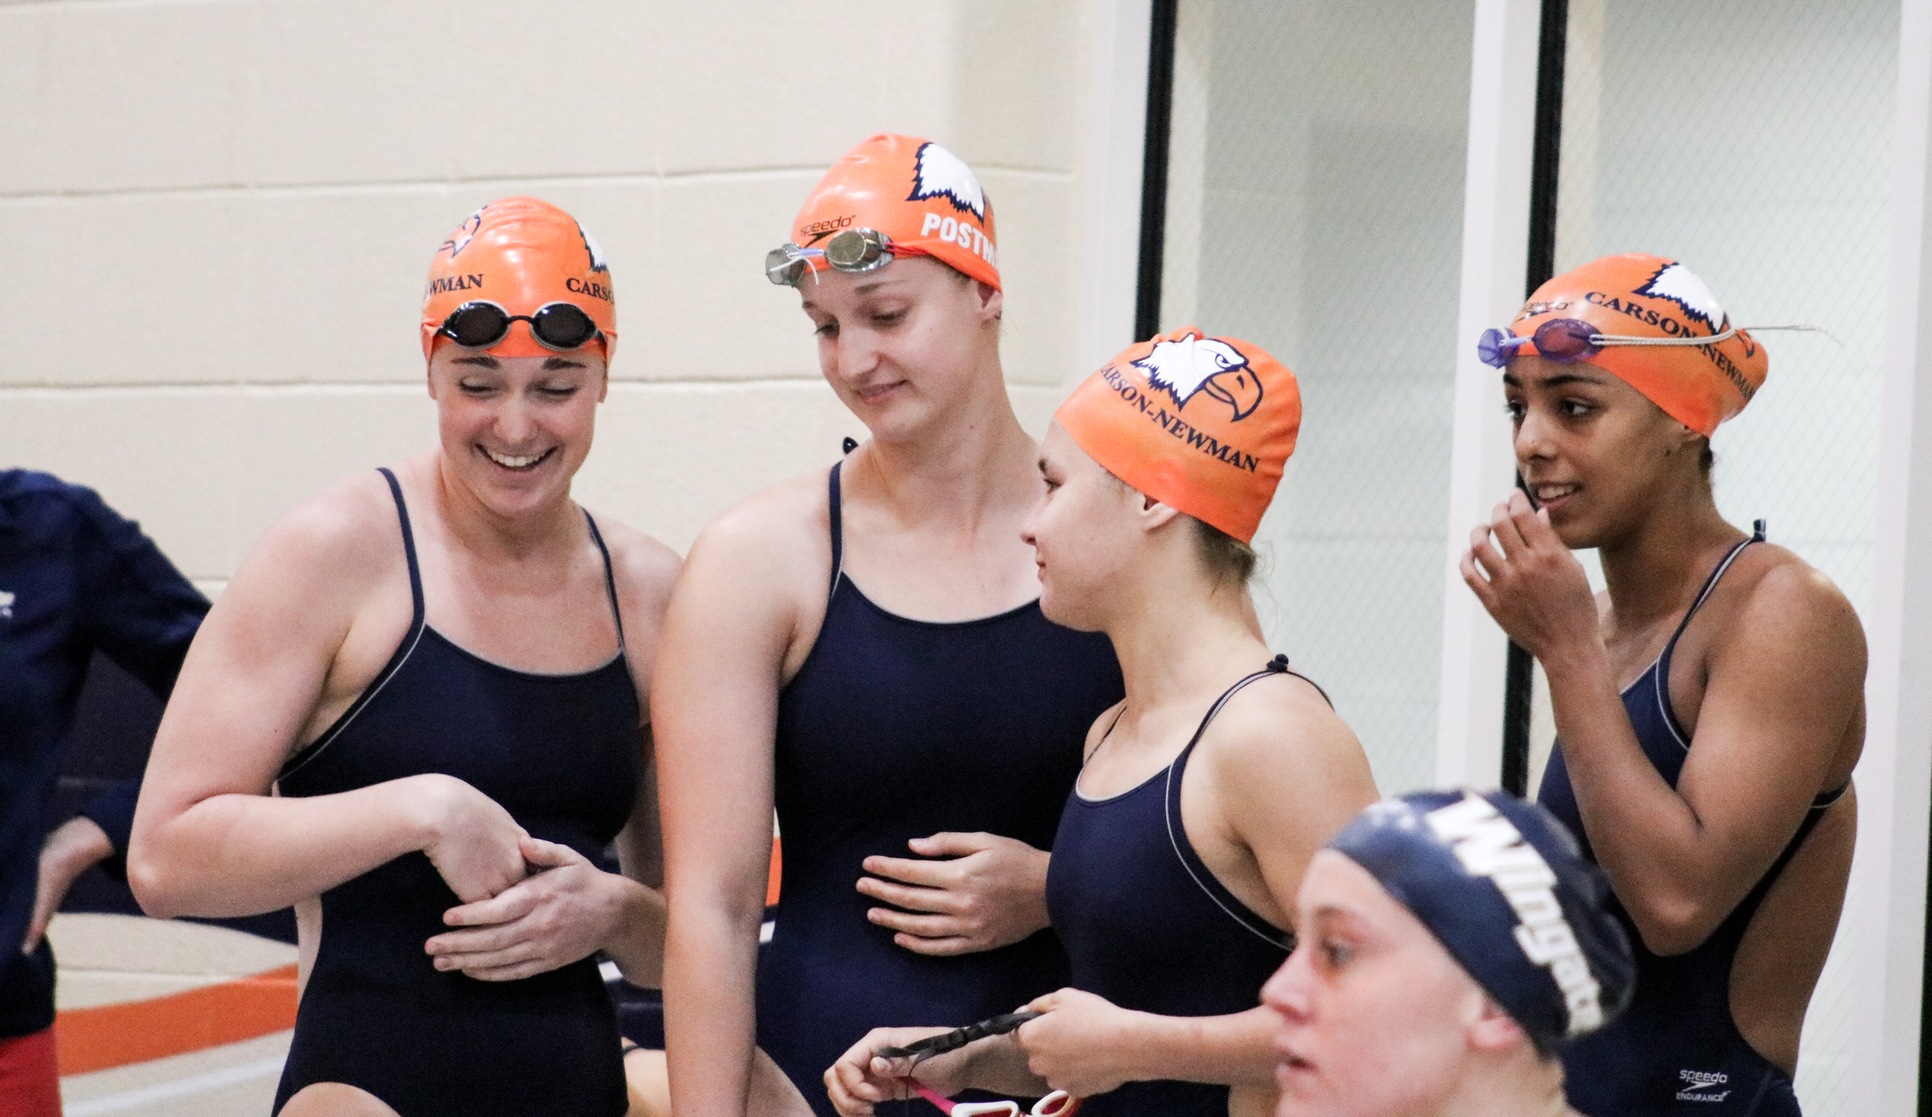 New national polls have both C-N swim programs inside the top-15